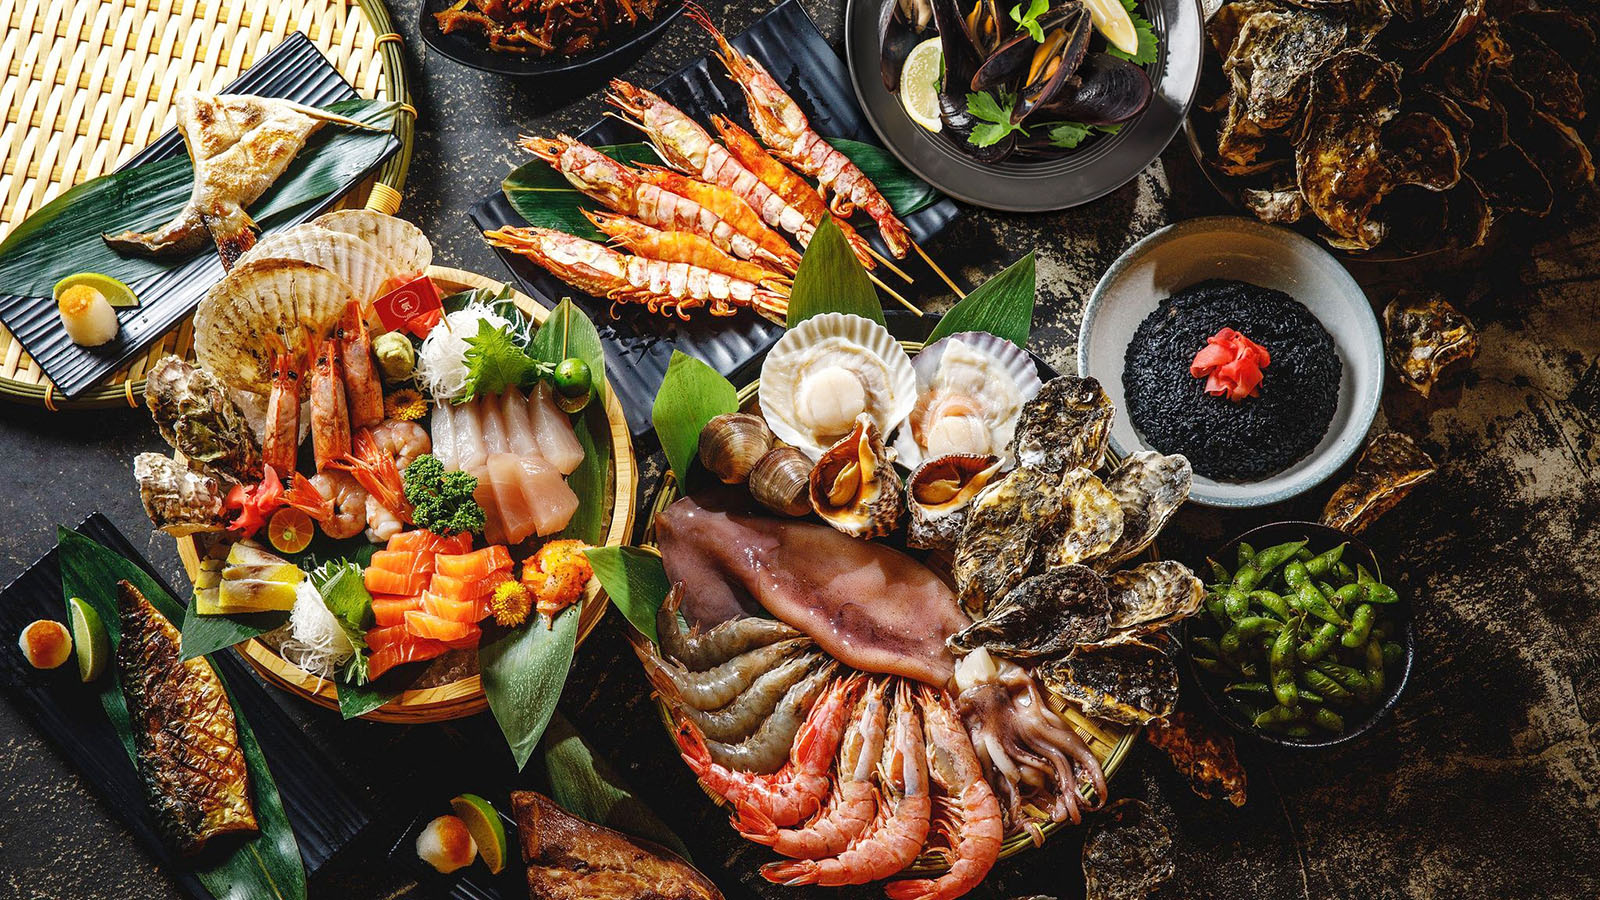 Special offer: “BOOK EARLY – PAY LESS” for buffets at GRAND MERCURE DANANG  - Official Danang Tourism Website